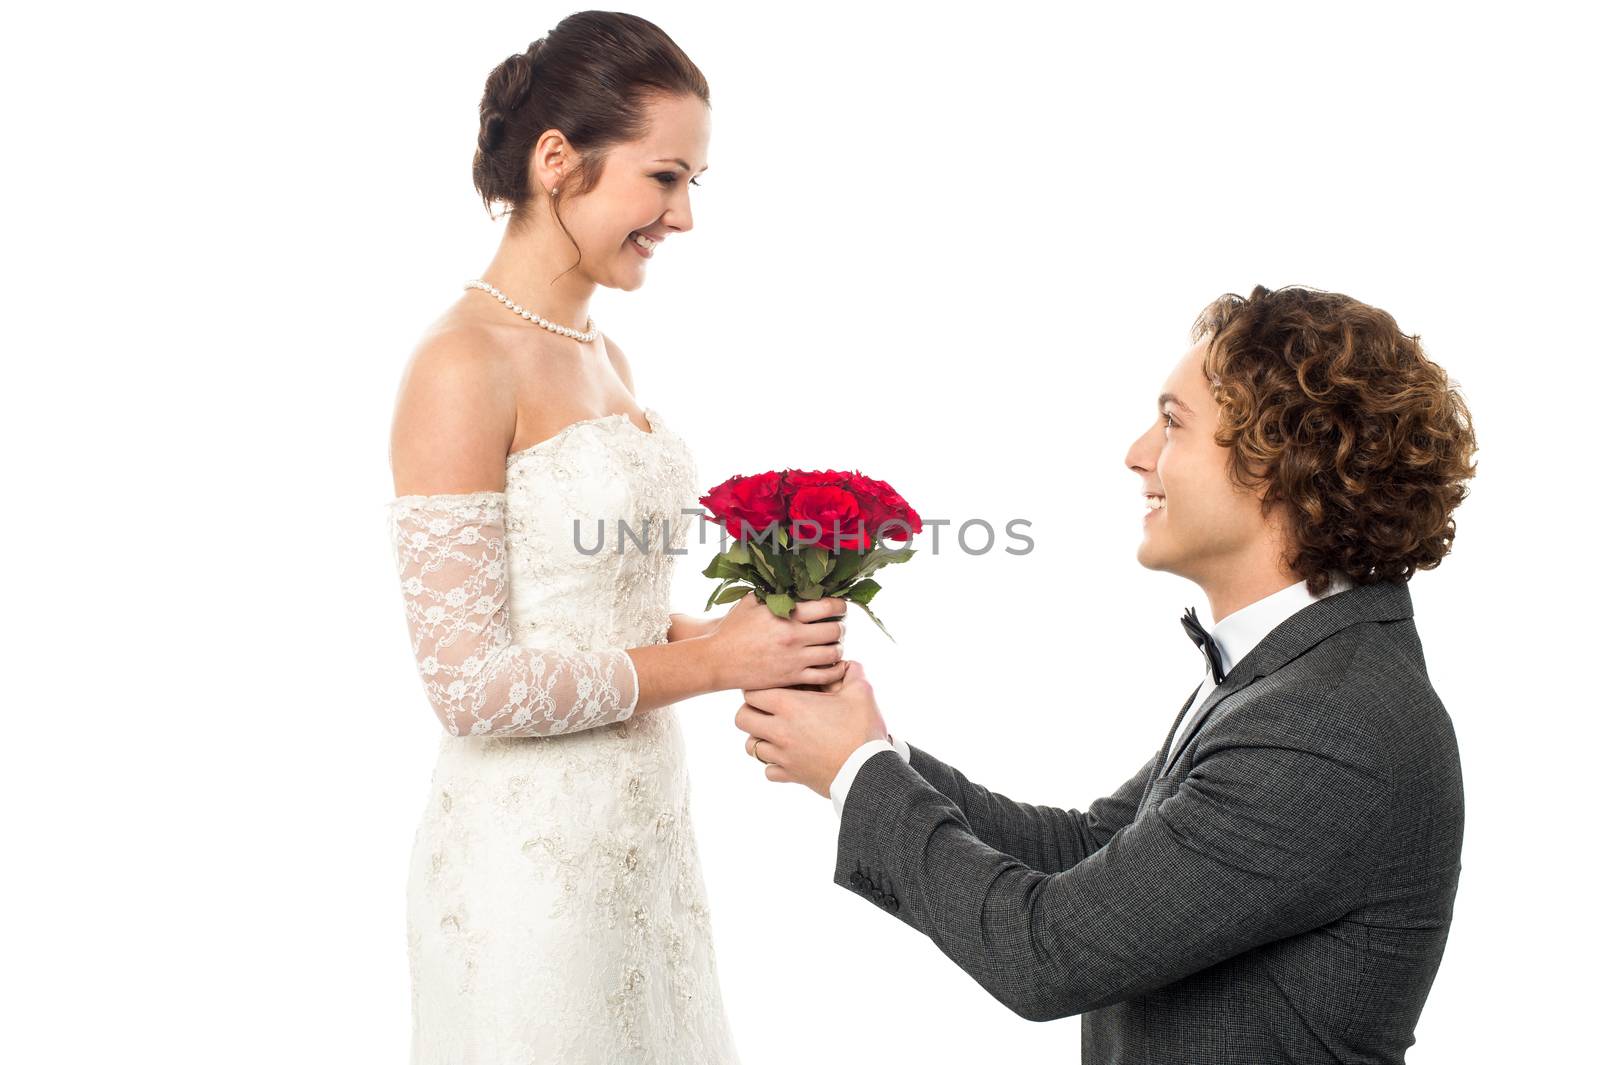 Romantic proposal by a groom